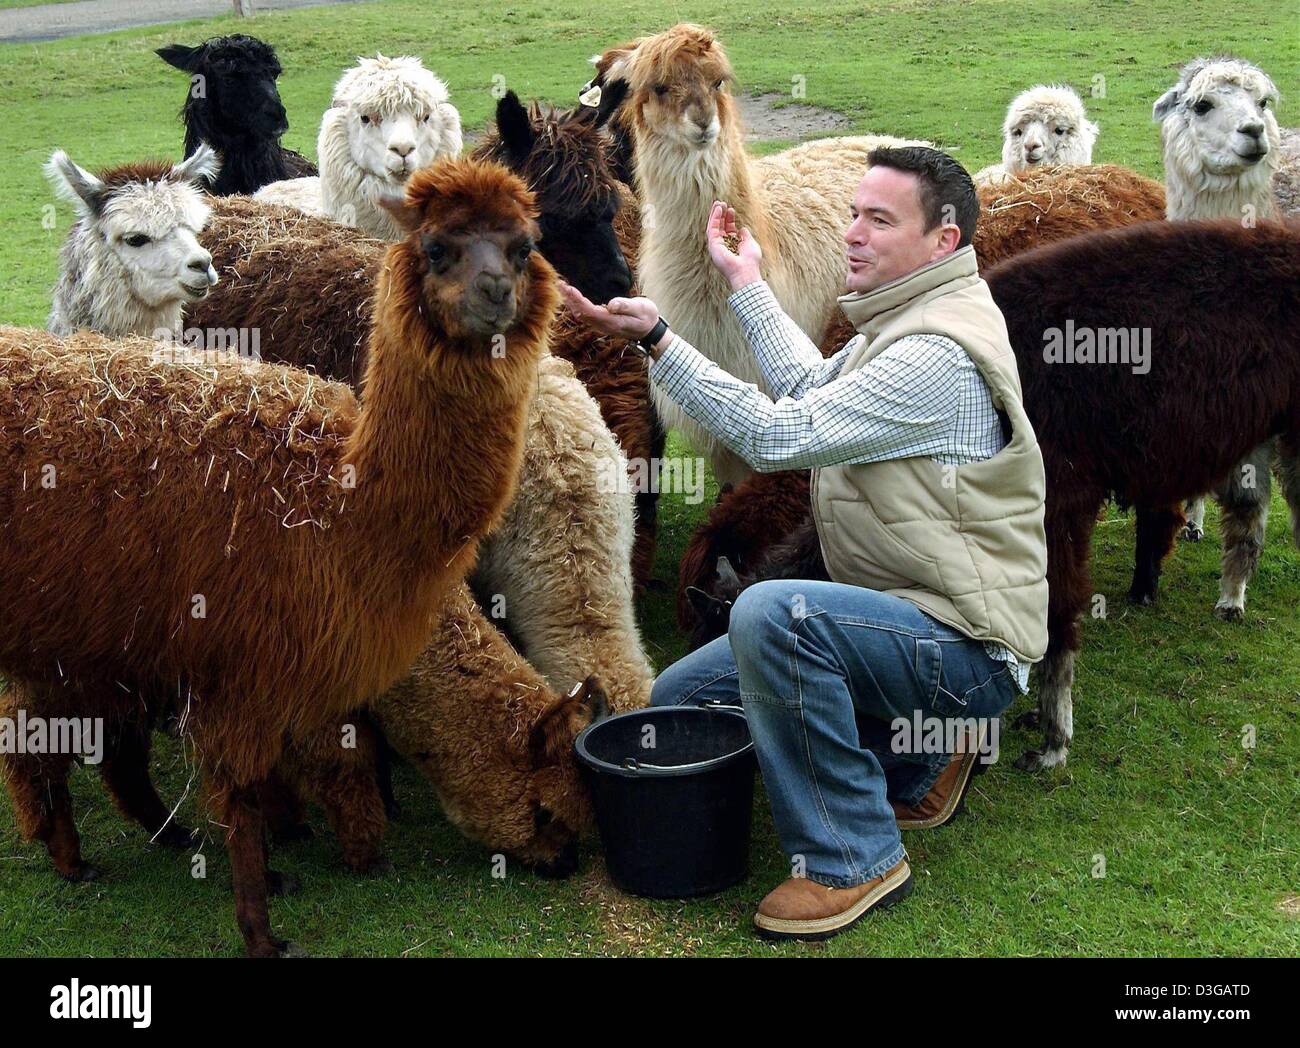 (dpa) - Andreas Borgers feeds the alpacas on his farm in Wesel, Germany, 7 April 2004. Alpacas were once a cherished treasure of the ancient Incan civilization and played a central role in the Incan culture in South America. Nowadays, they are being successfully raised and enjoyed throughout the world as they produce one of the world's finest and most luxurious natural fibers. This Stock Photo